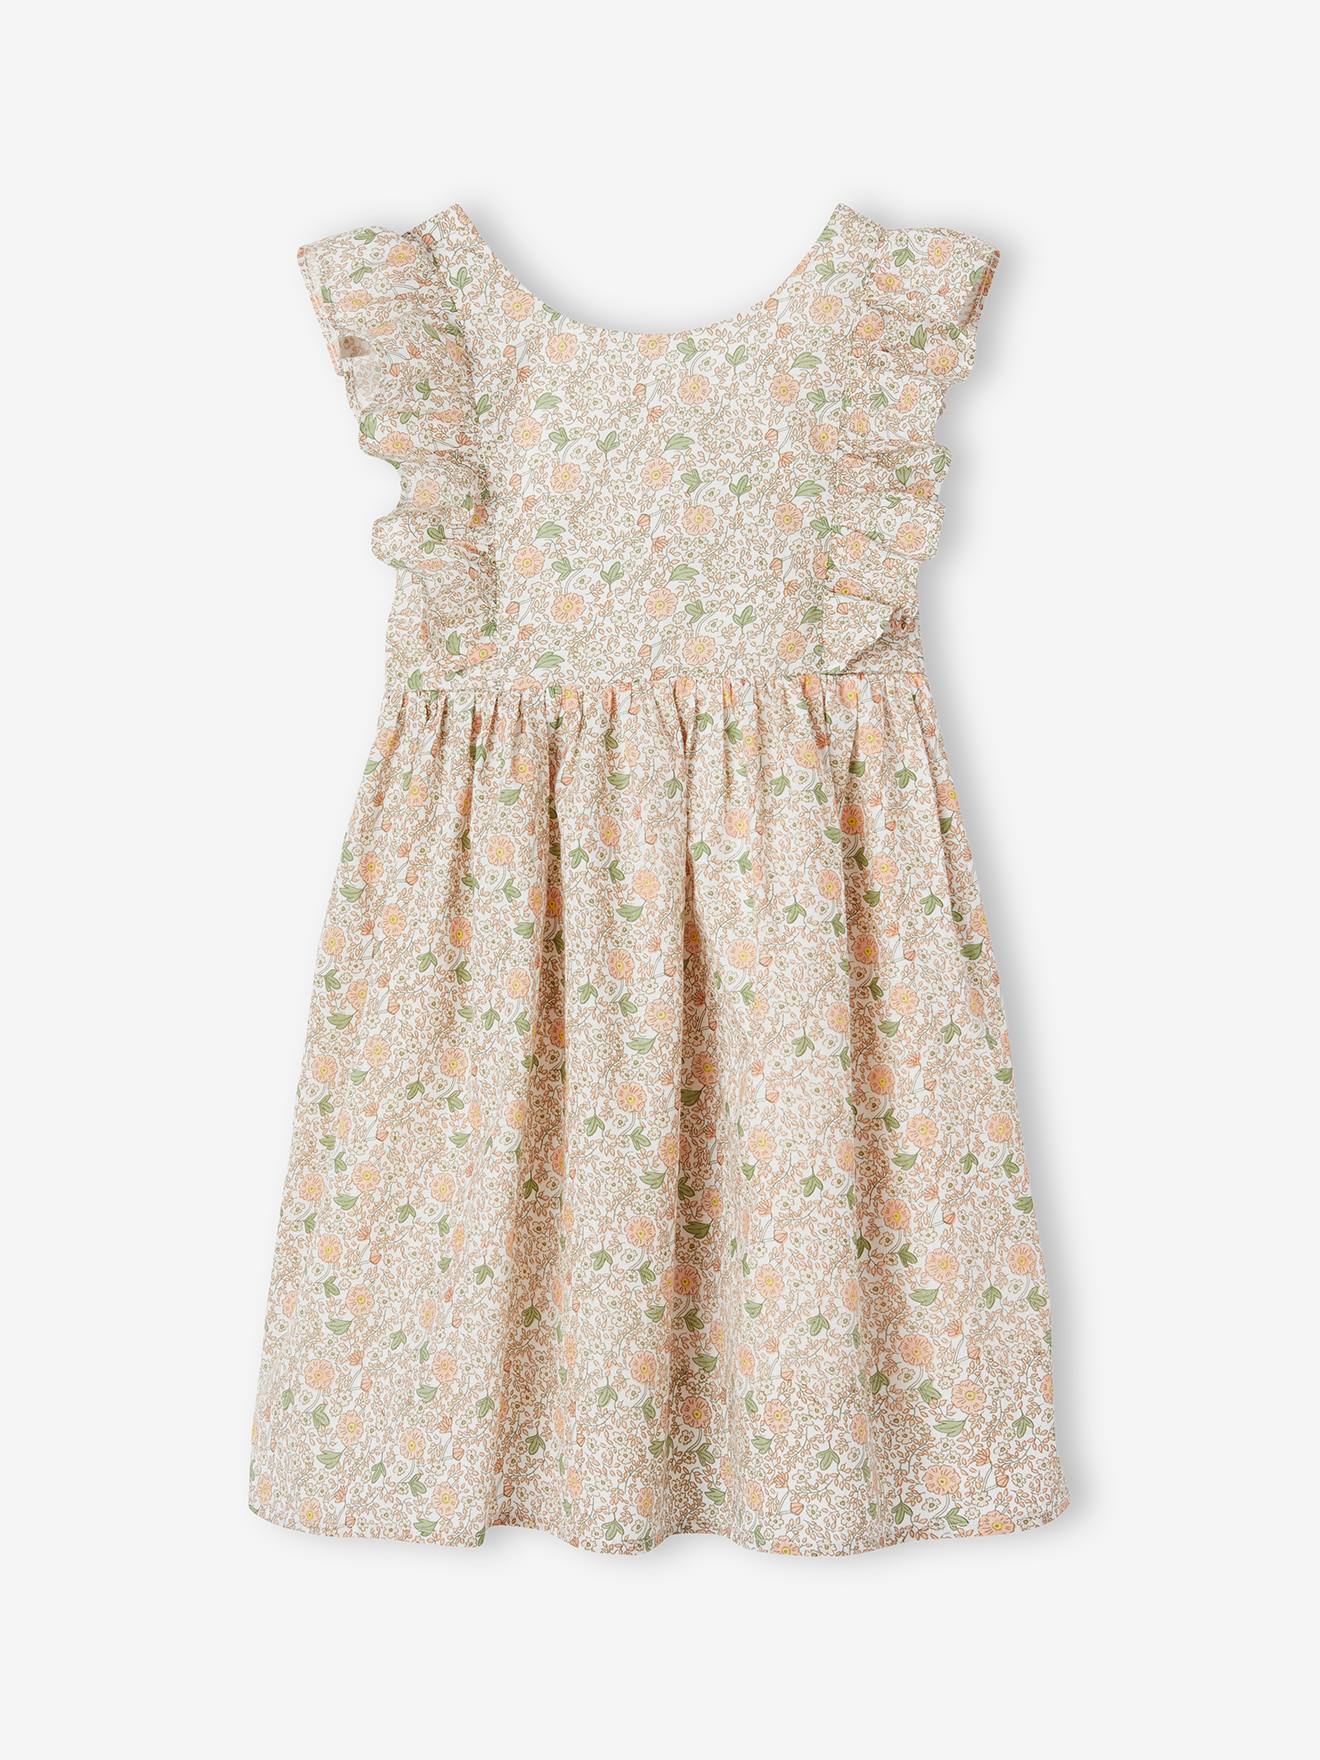 Frilly Occasion Wear Dress with Flower Motifs for Girls vanilla